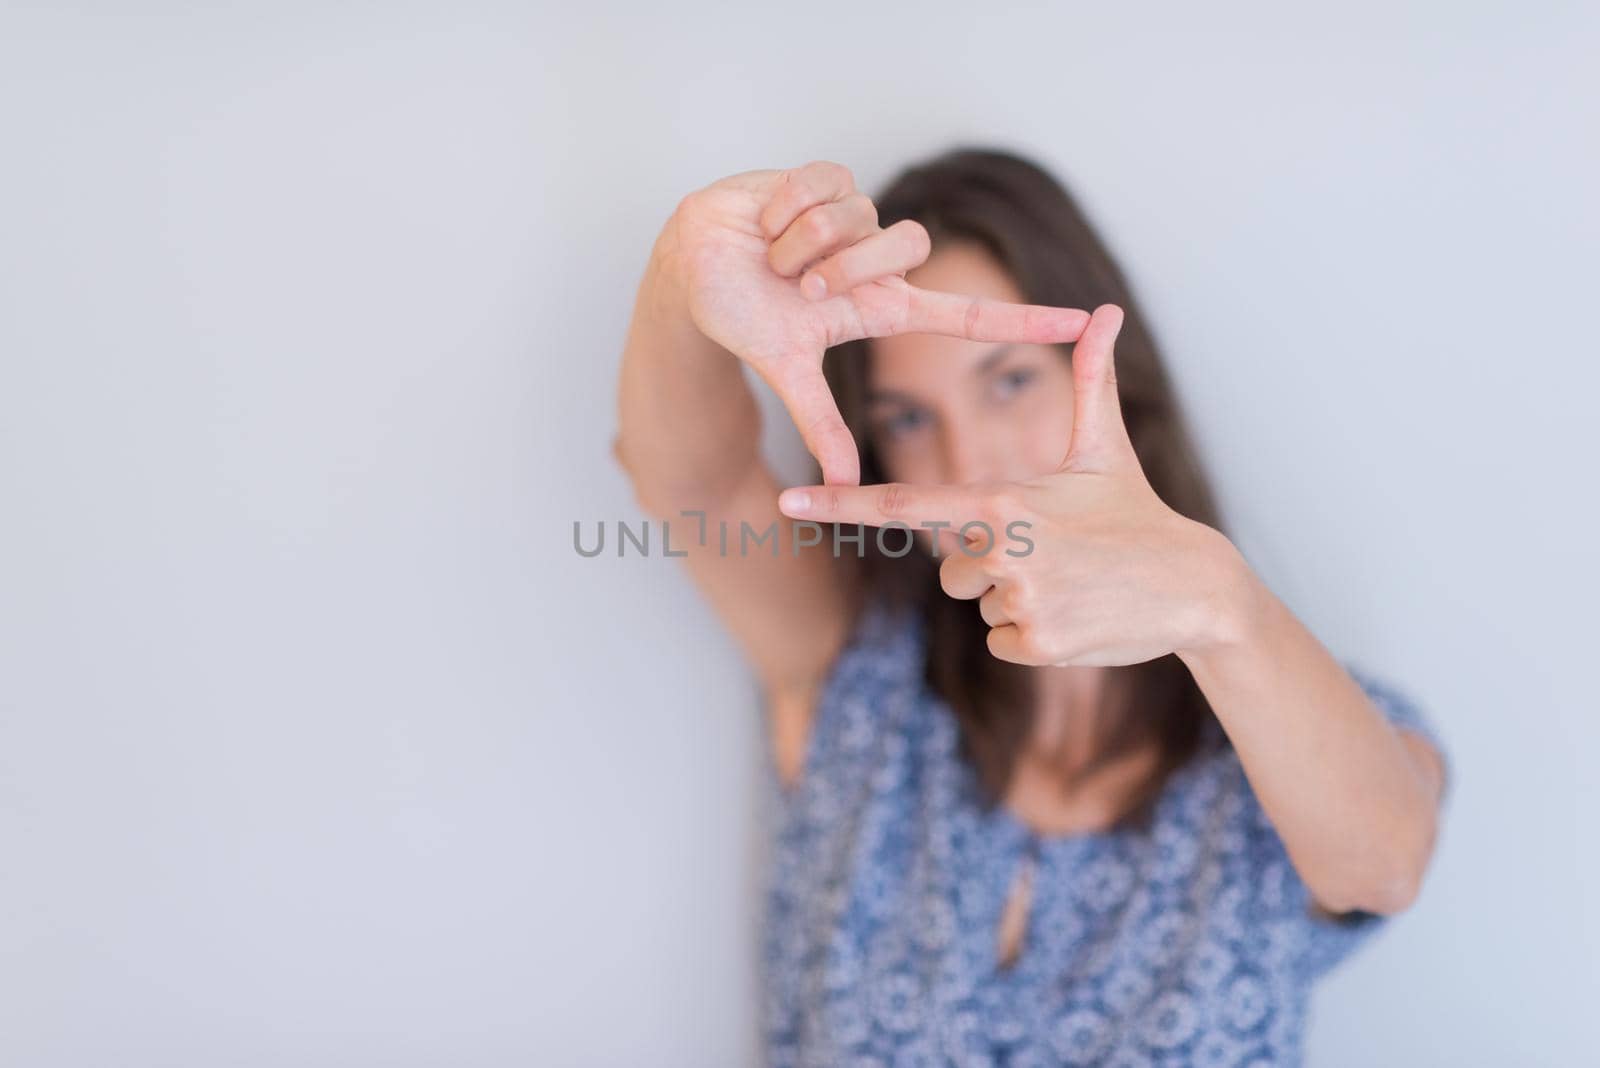 young happy woman showing framing hand gesture isolated on a white background